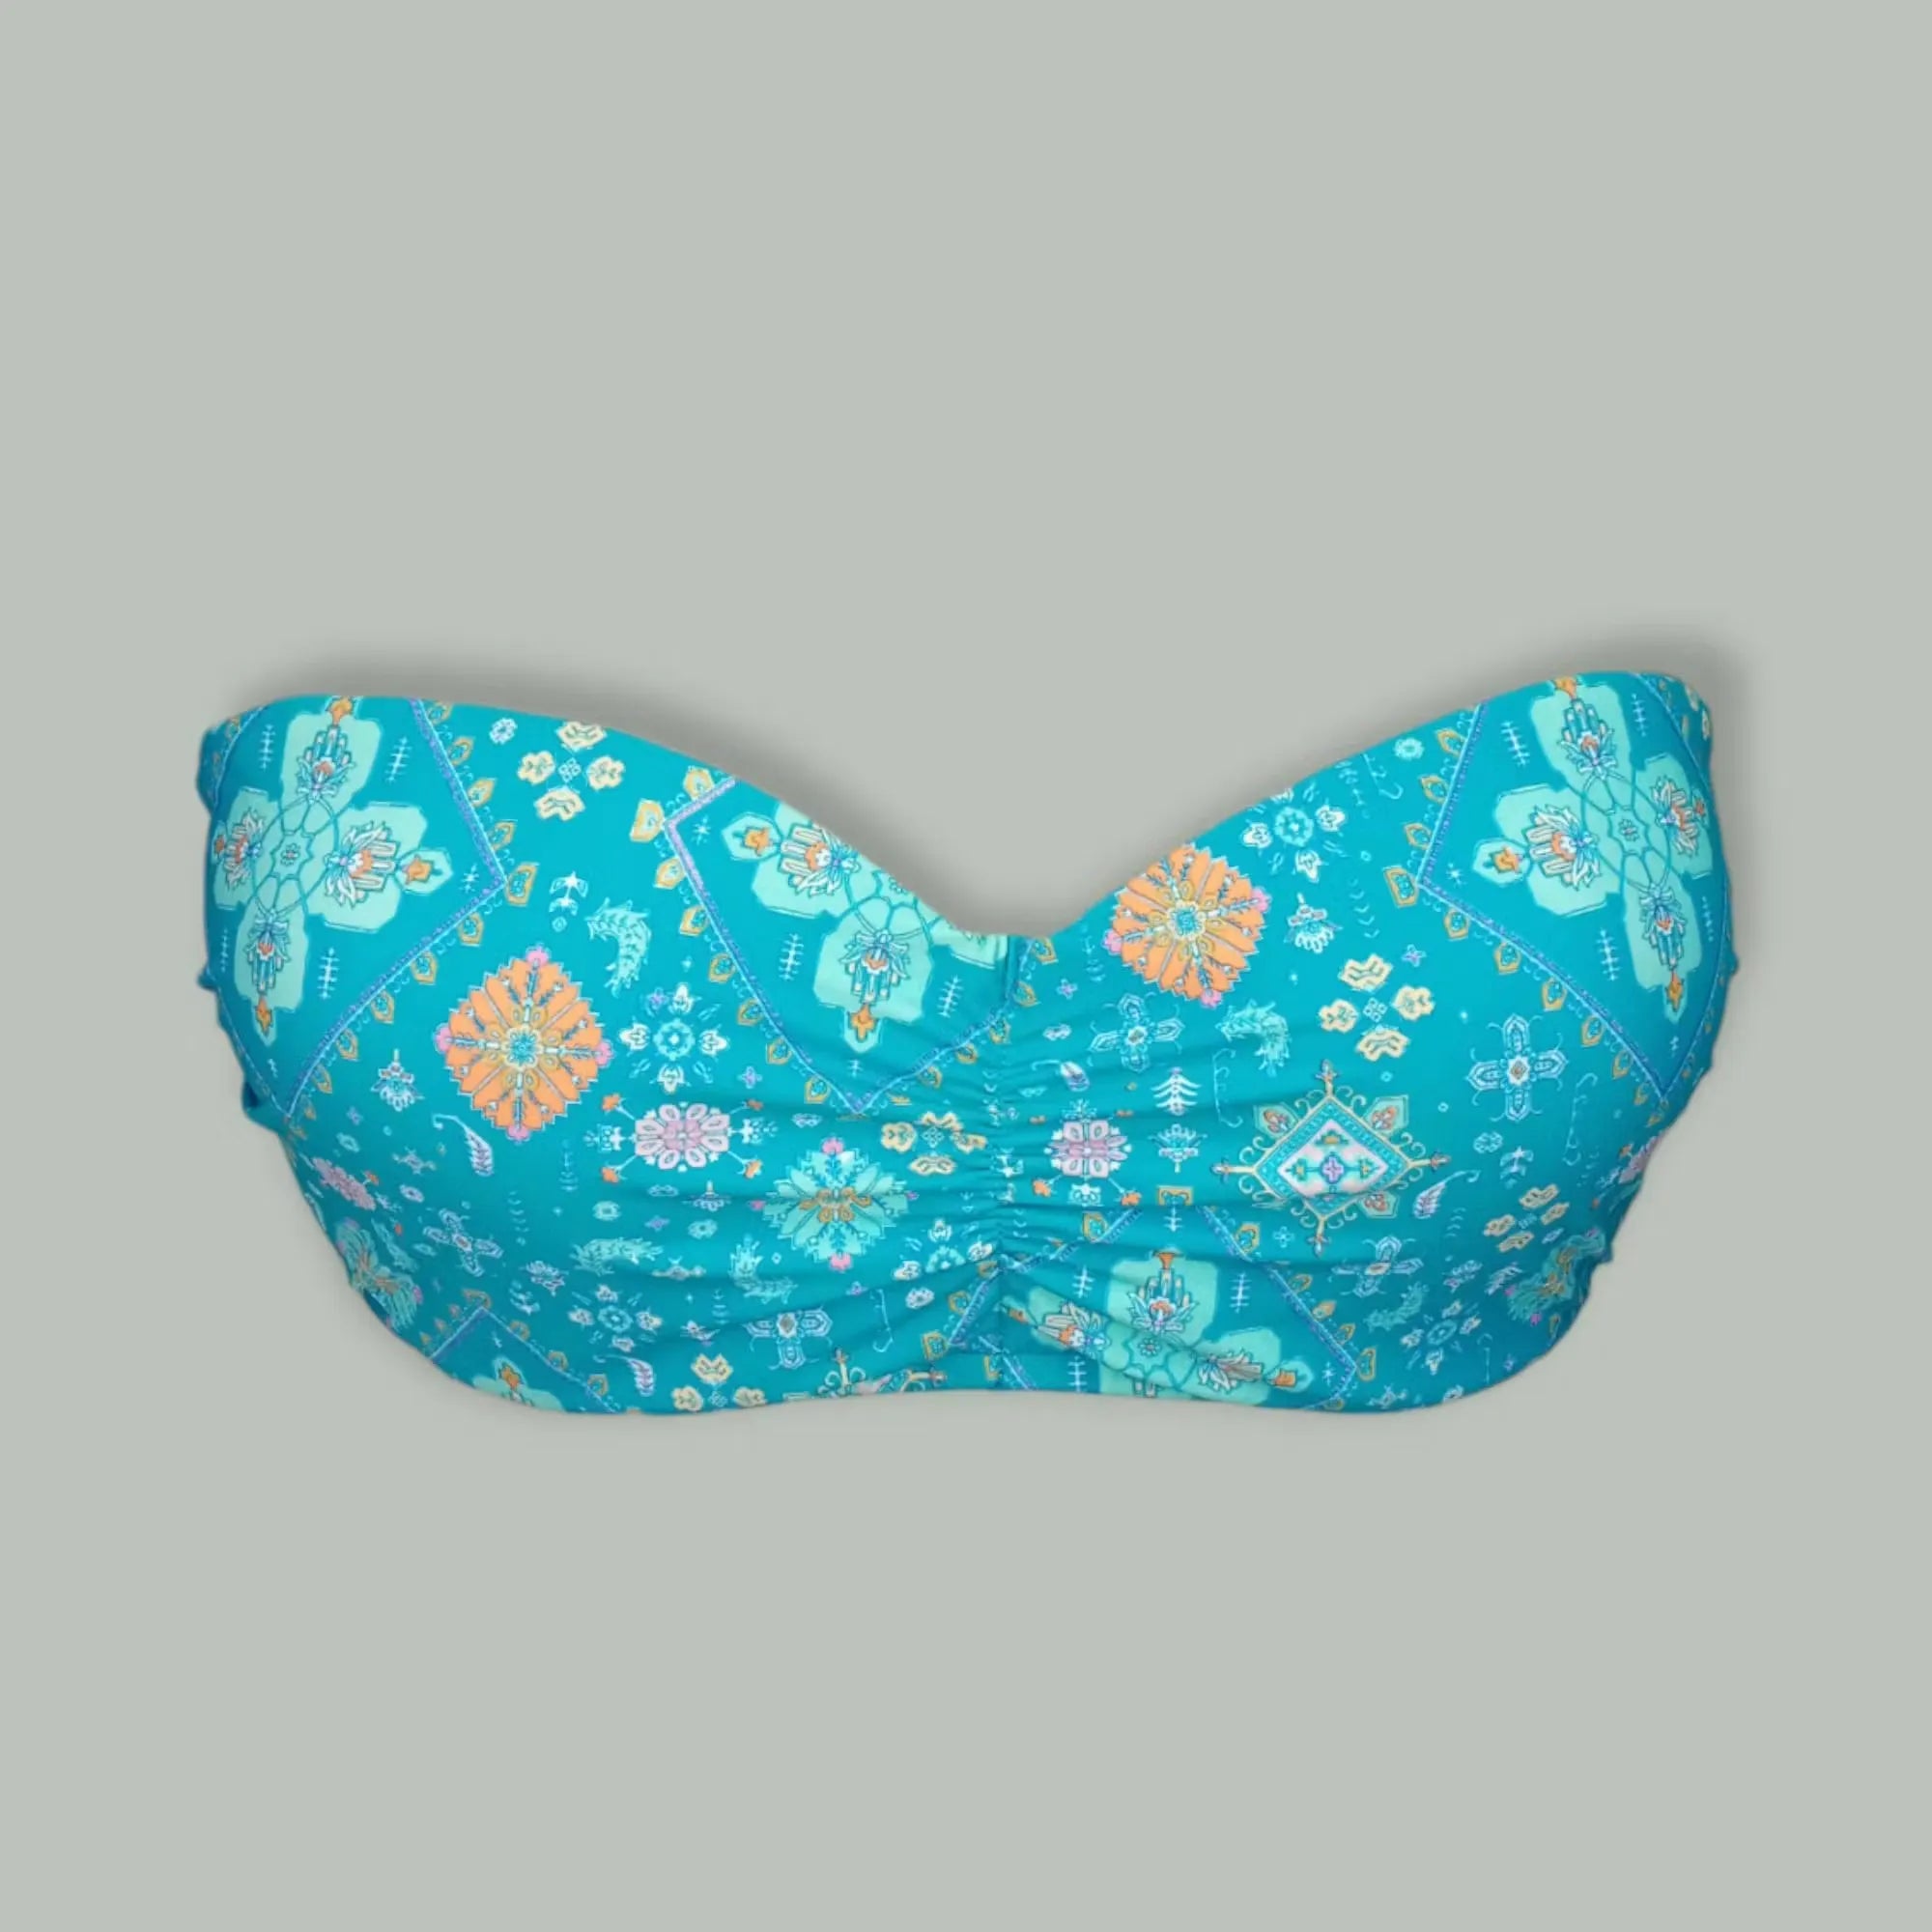 Seafolly Floral Blue Strapless Underwire Bikini Top features a vibrant floral print and provides reliable support for all-day comfort. Shop on Dubailisit!